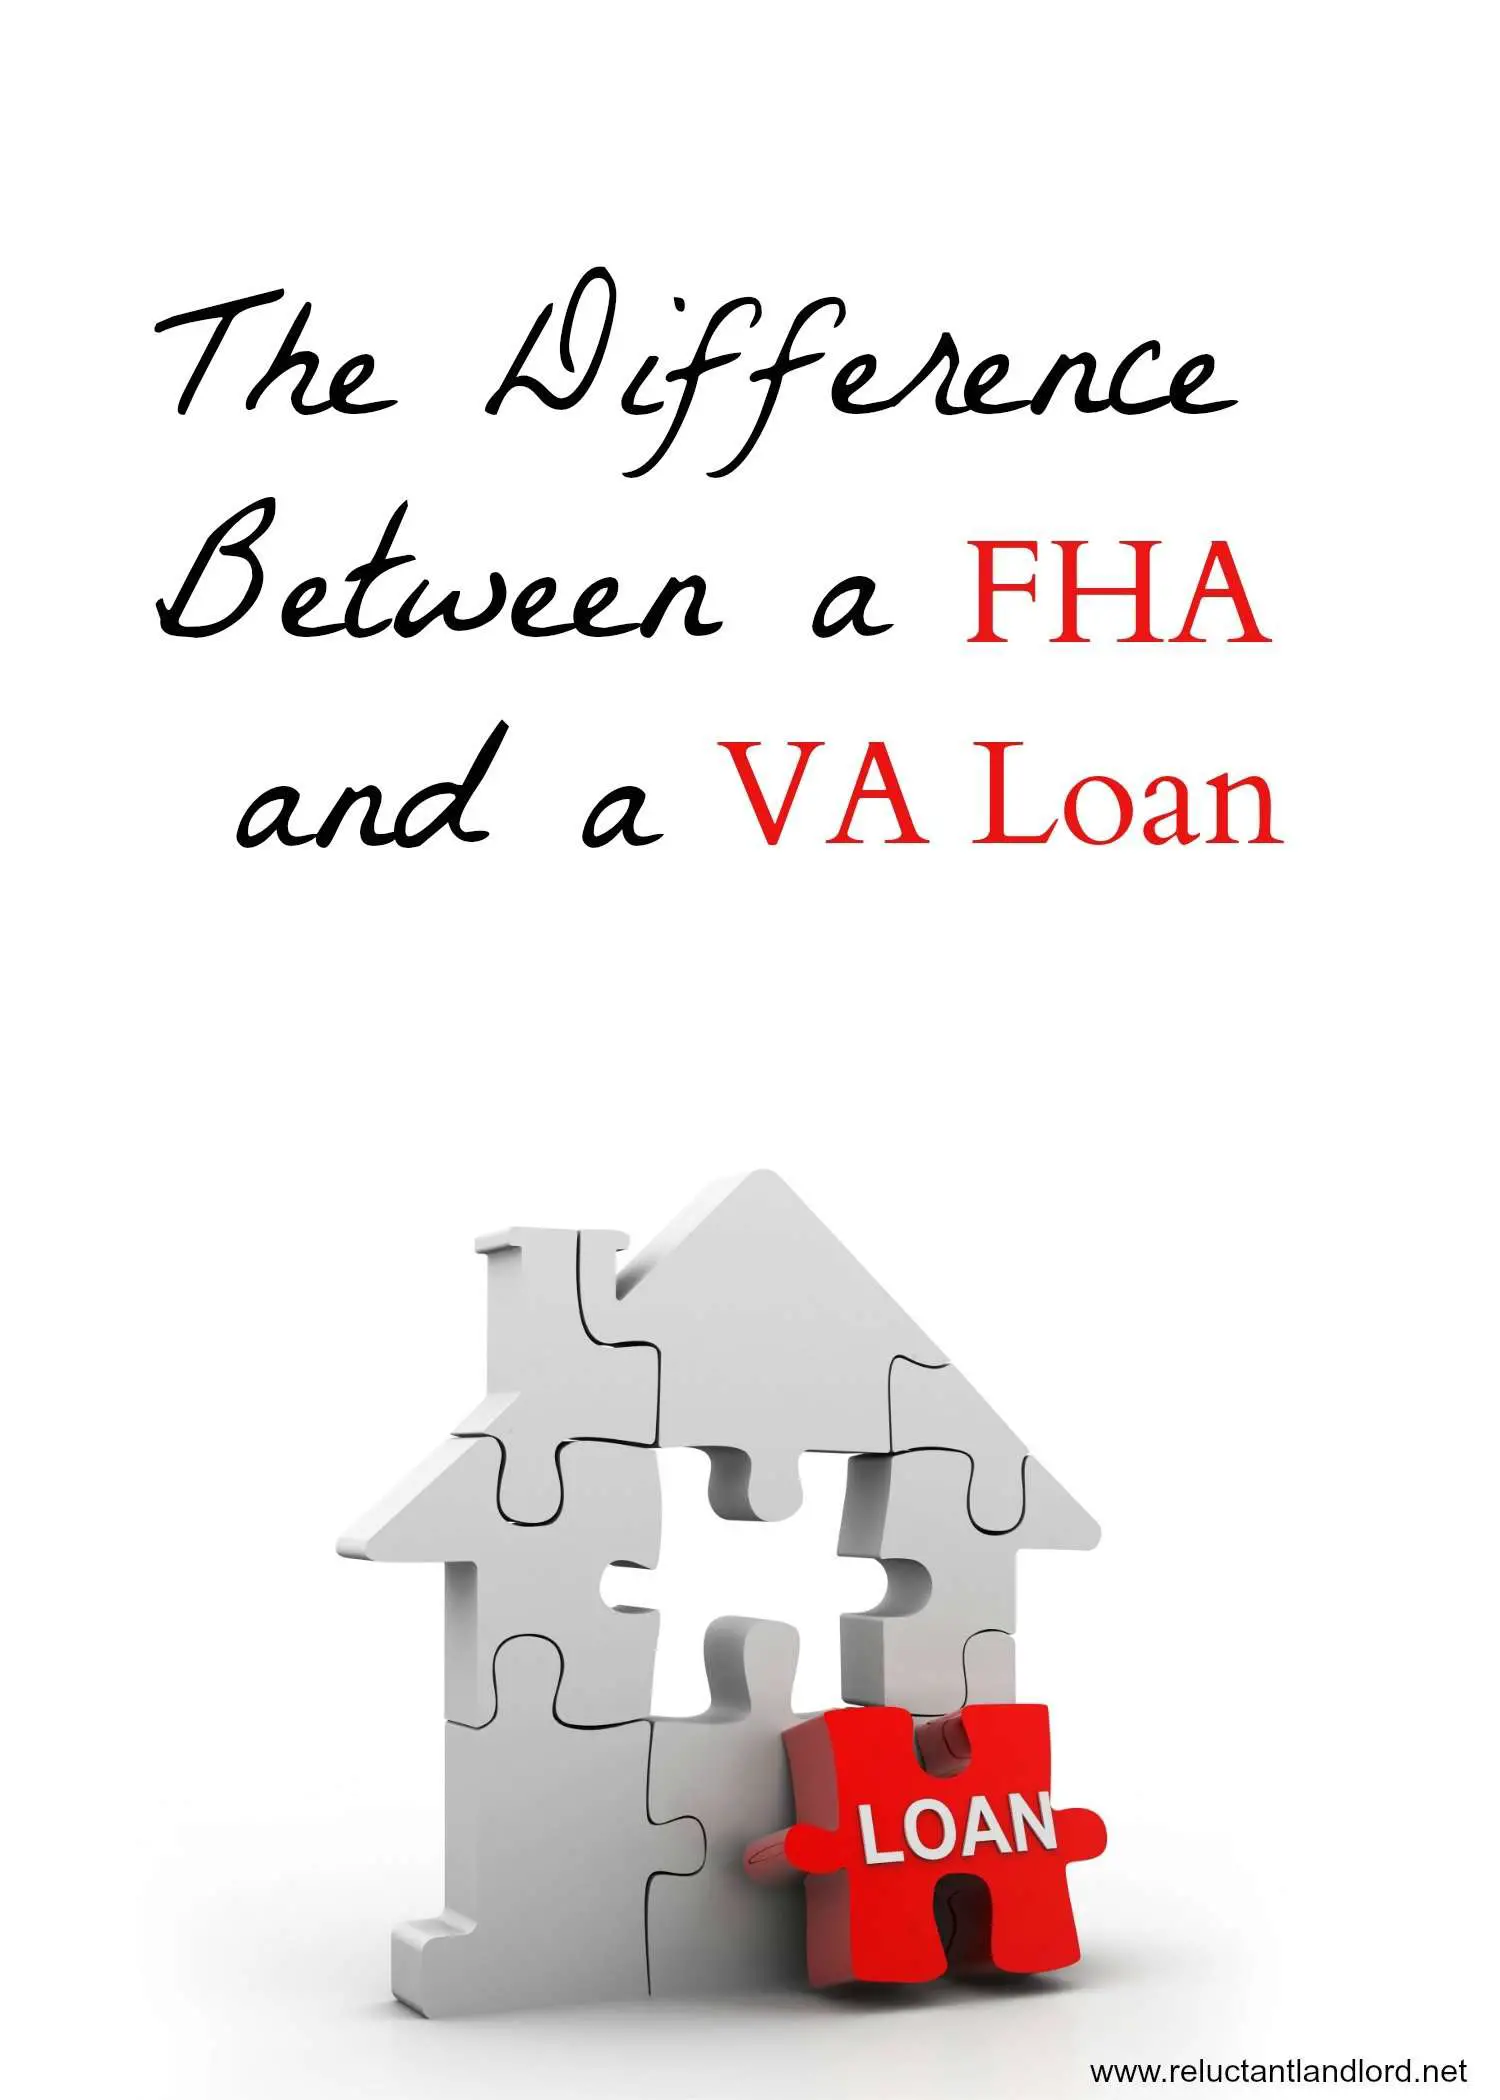 The Difference Between FHA and a VA Loan